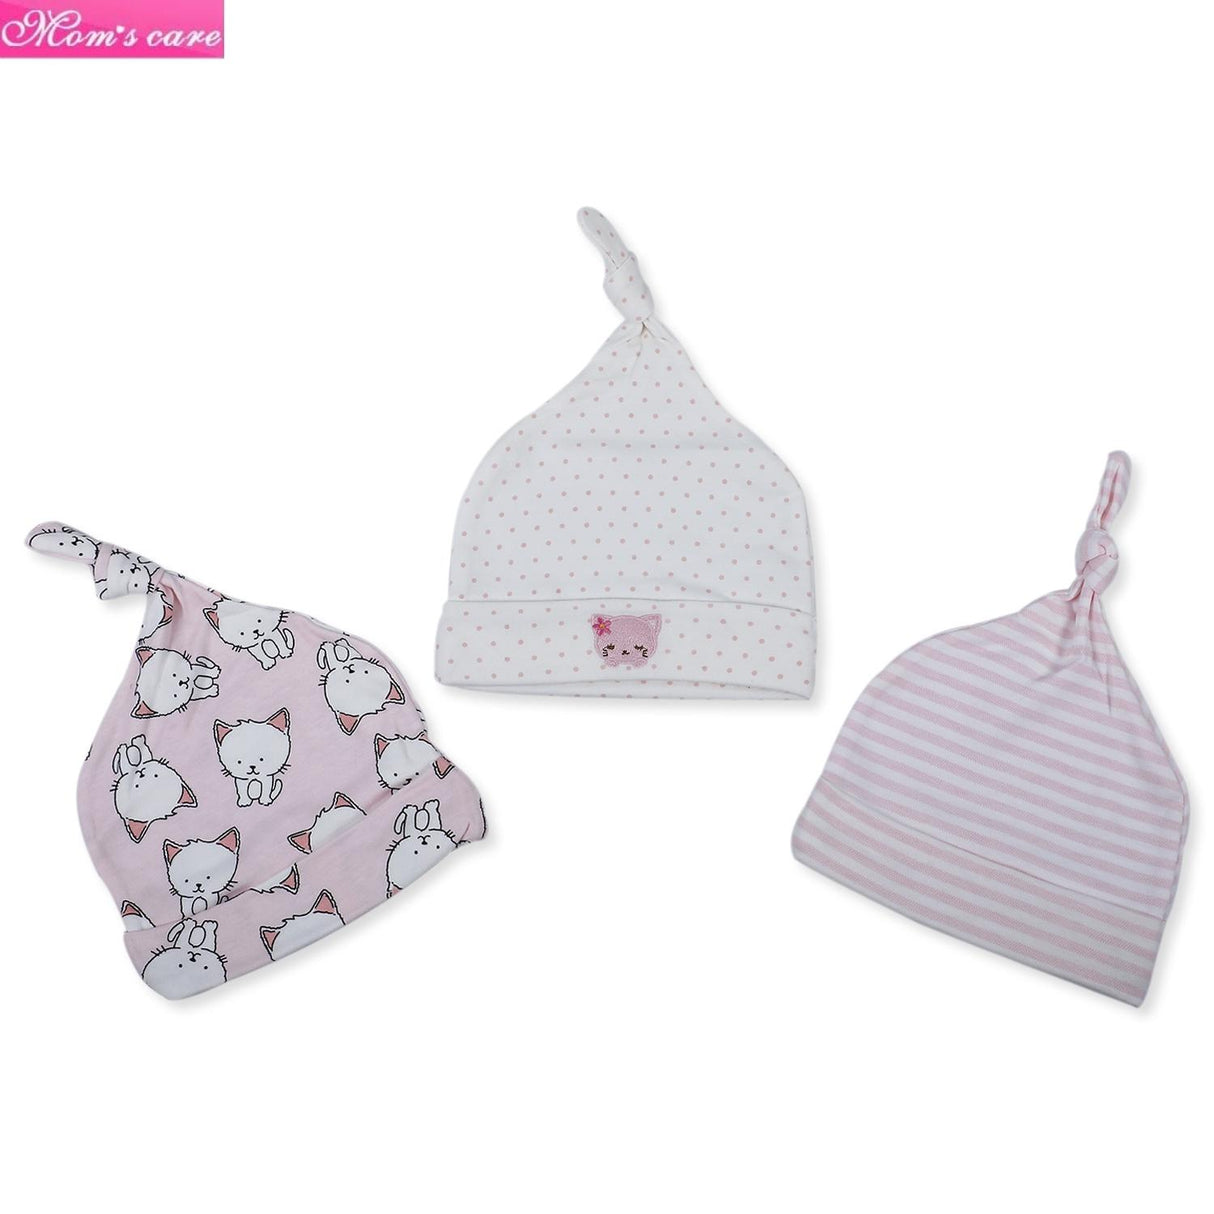 Mom's Care Soft Multiprinted Pack Of 3 Cotton Caps